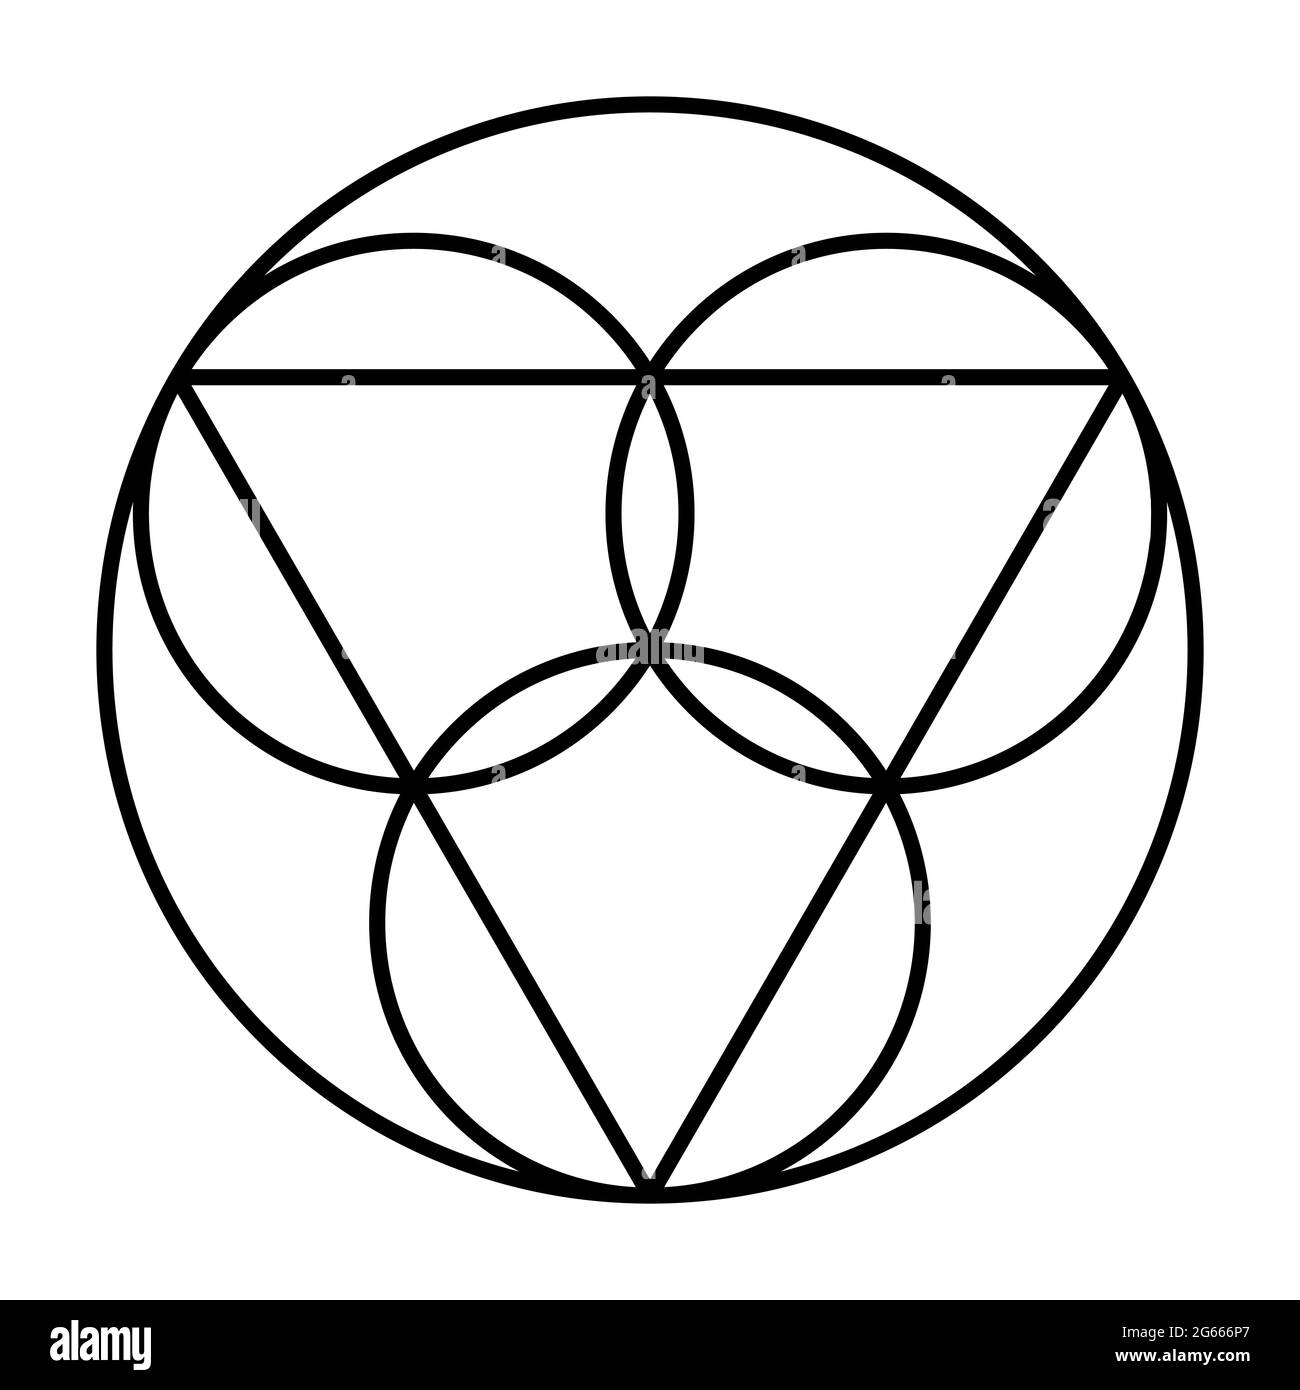 Trinity symbol. Three circles, representing the coeternal and consubstantial persons Father, the Son Jesus Christ and the Holy Spirit. Stock Photo